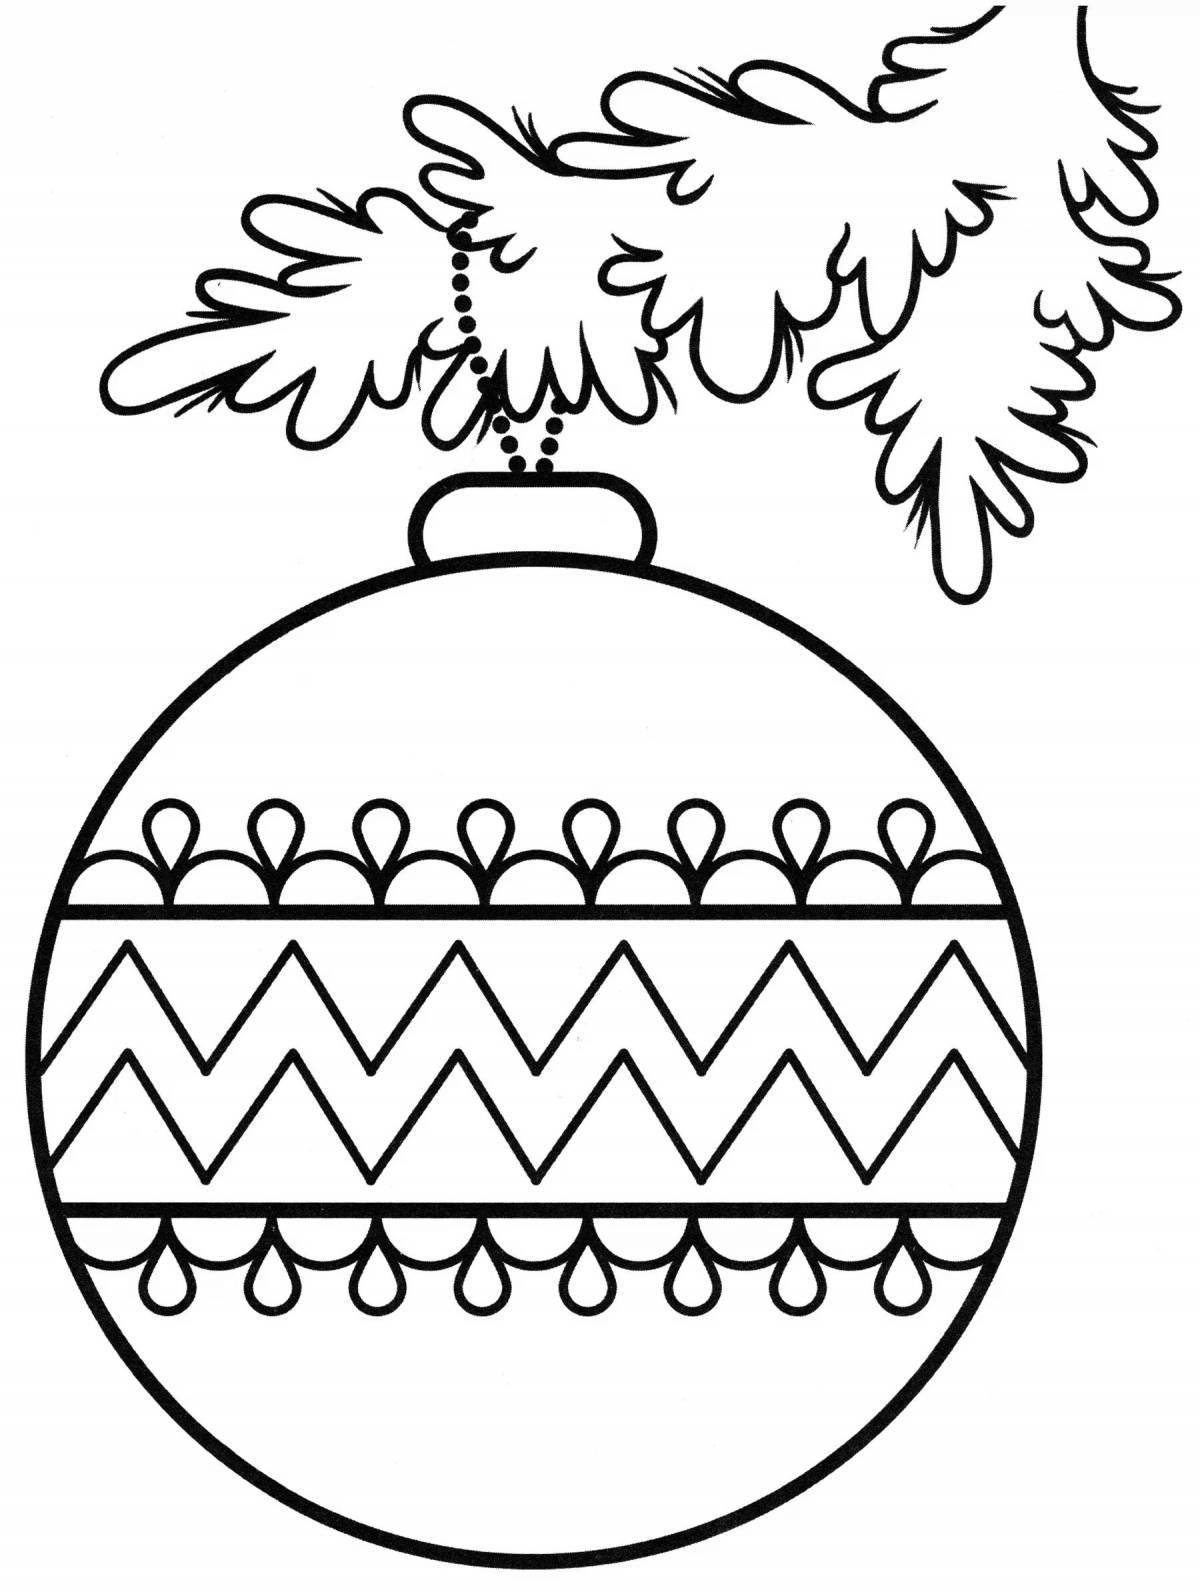 Awesome Christmas tree branch coloring book